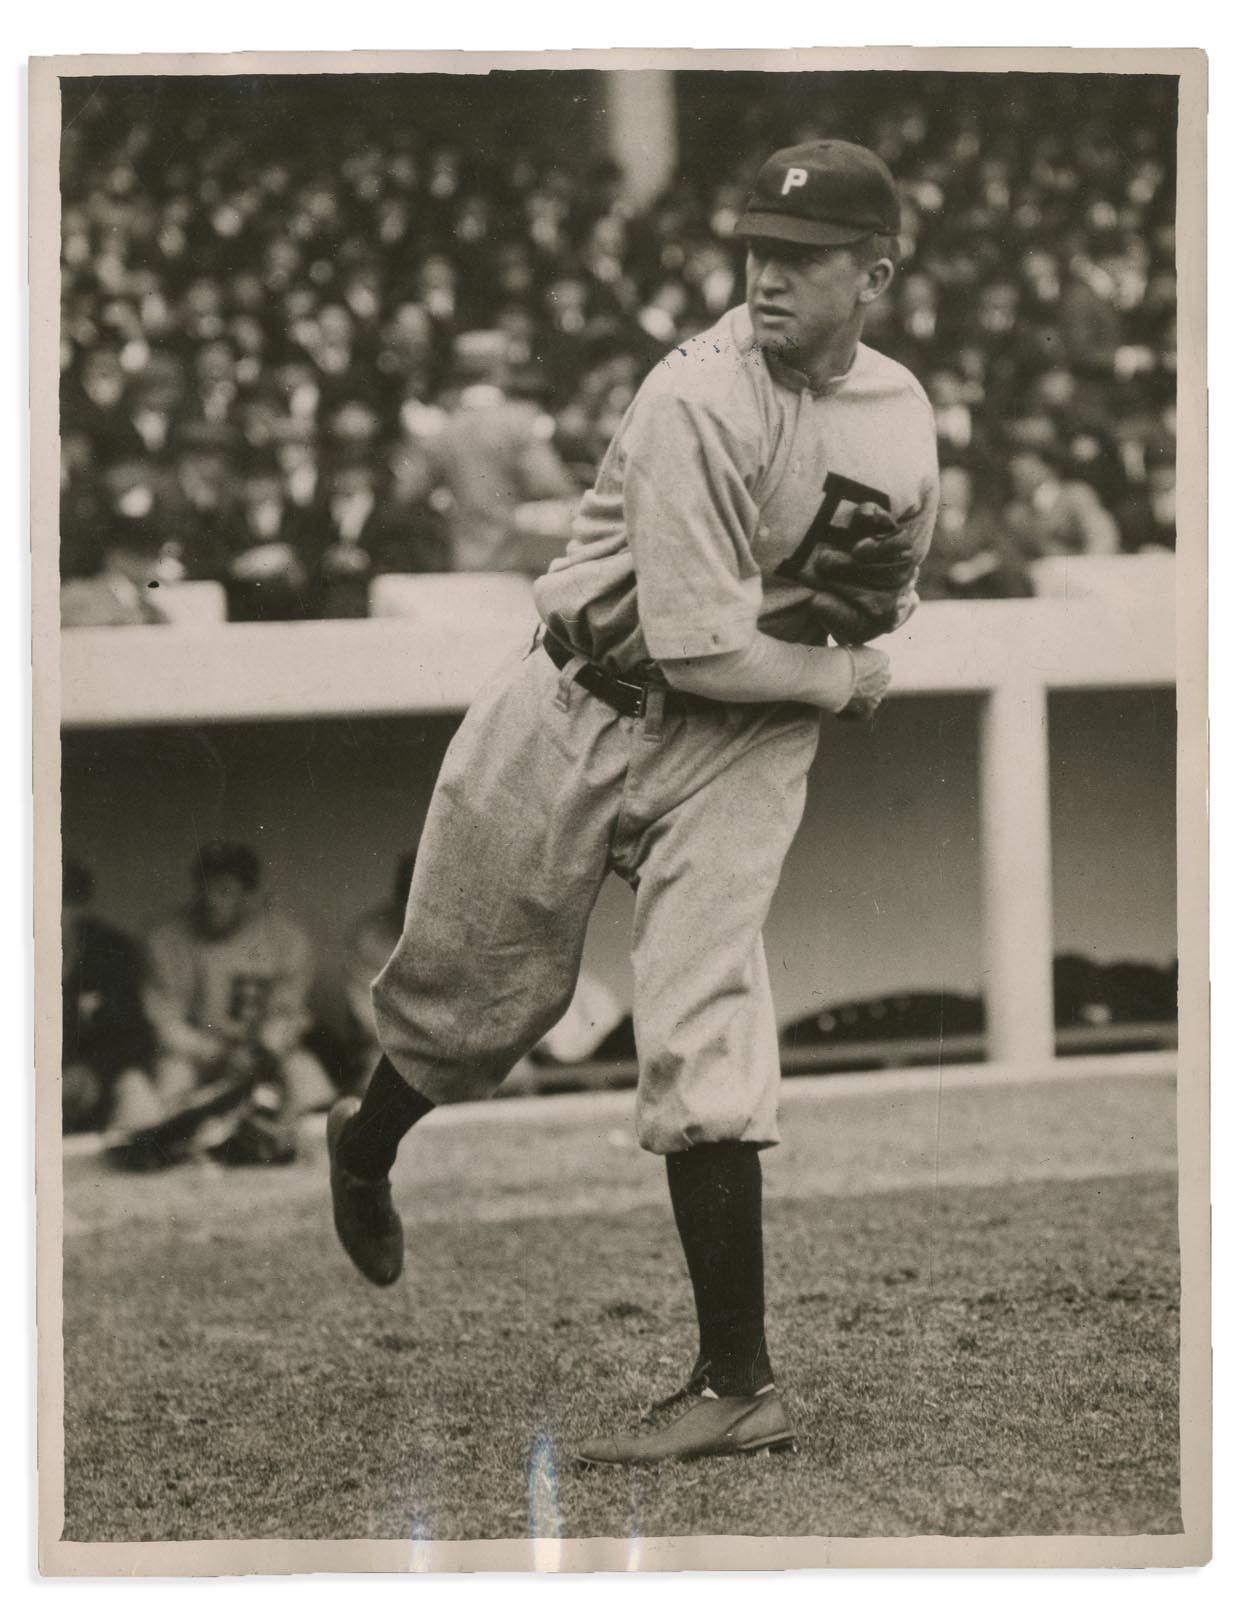 Vintage Sports Photographs - 1913 Grover Cleveland Alexander by Paul Thompson Type I Photograph